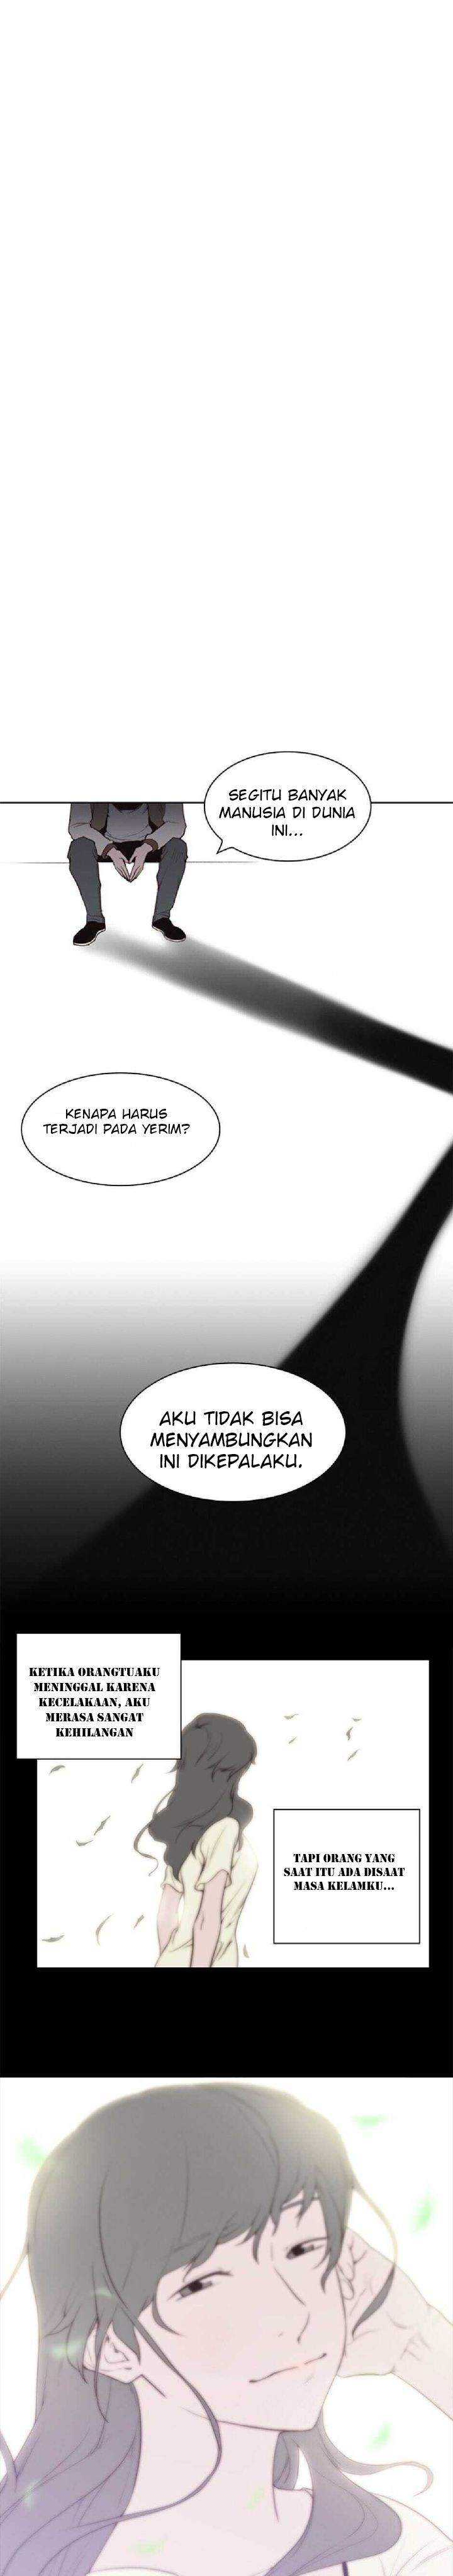 Item Chapter 03 - 135